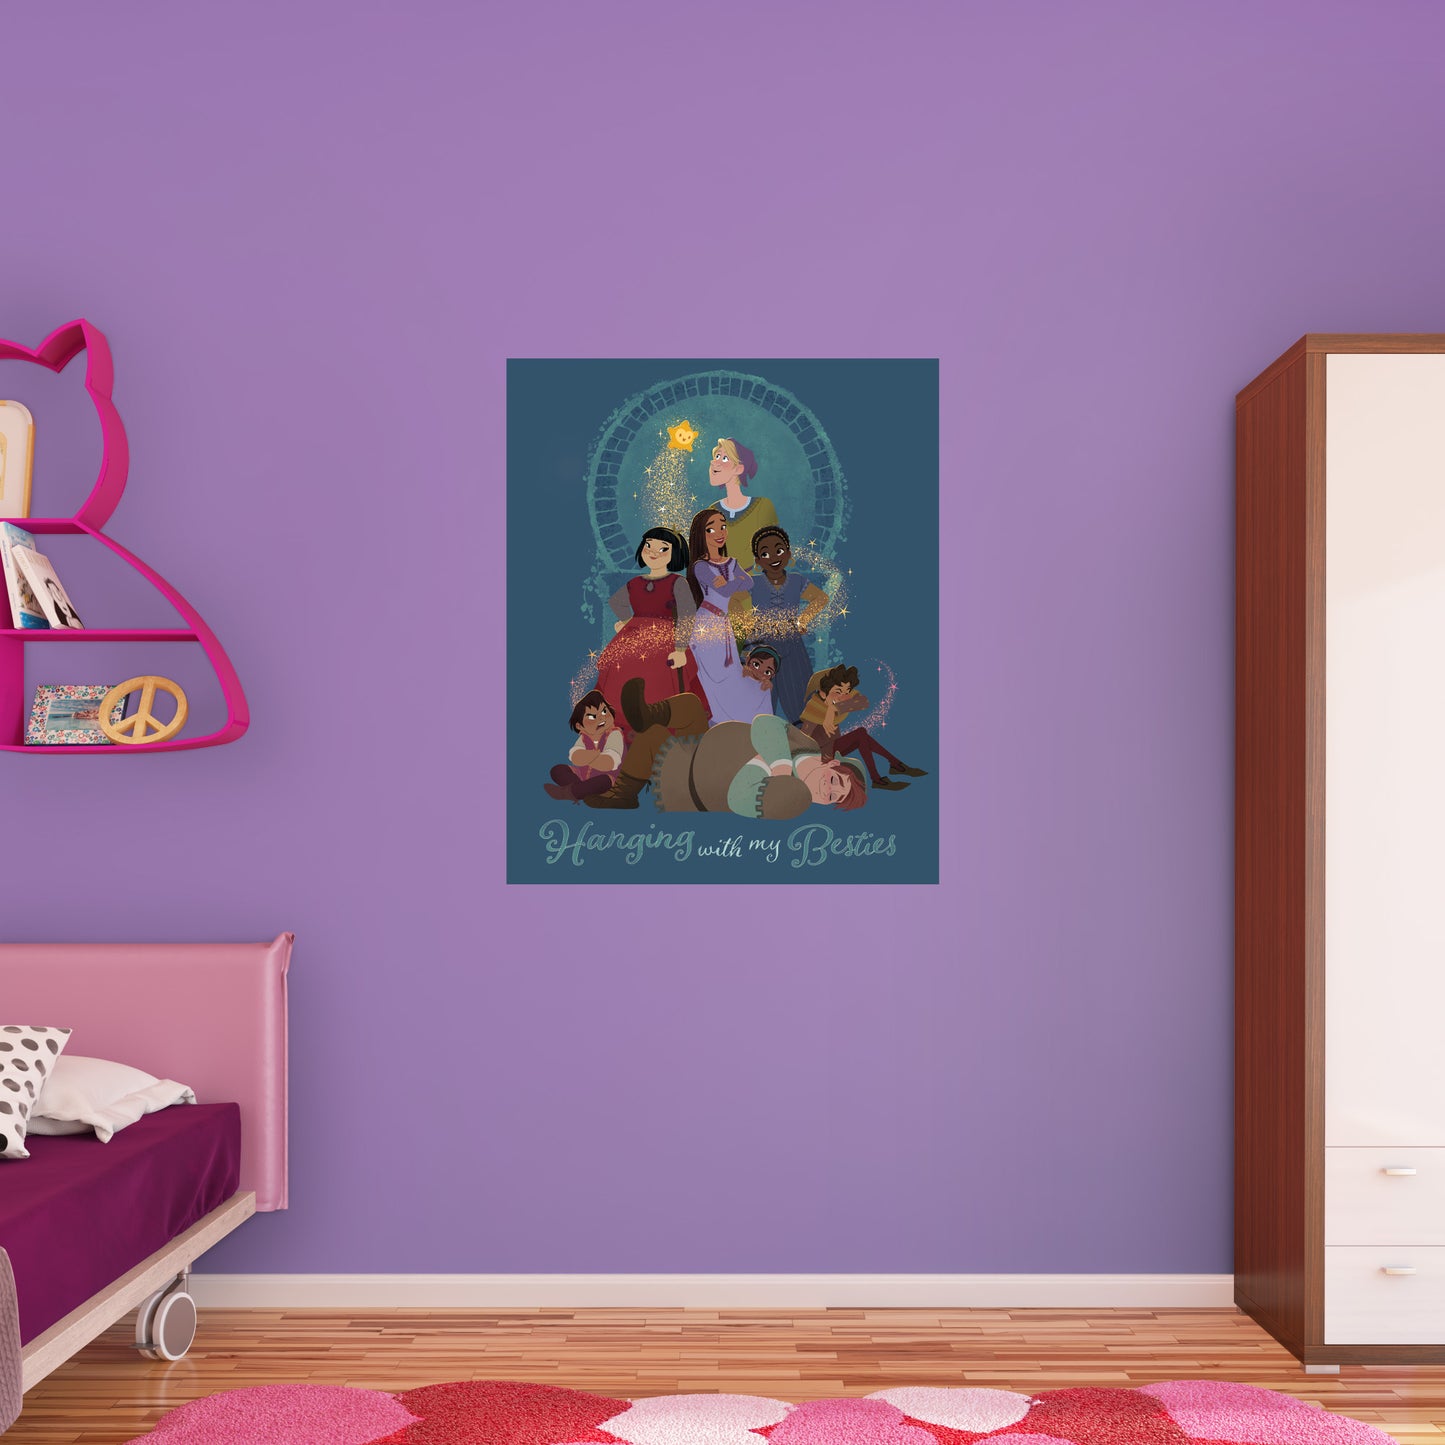 Wish Asha and Friends Wall Decals